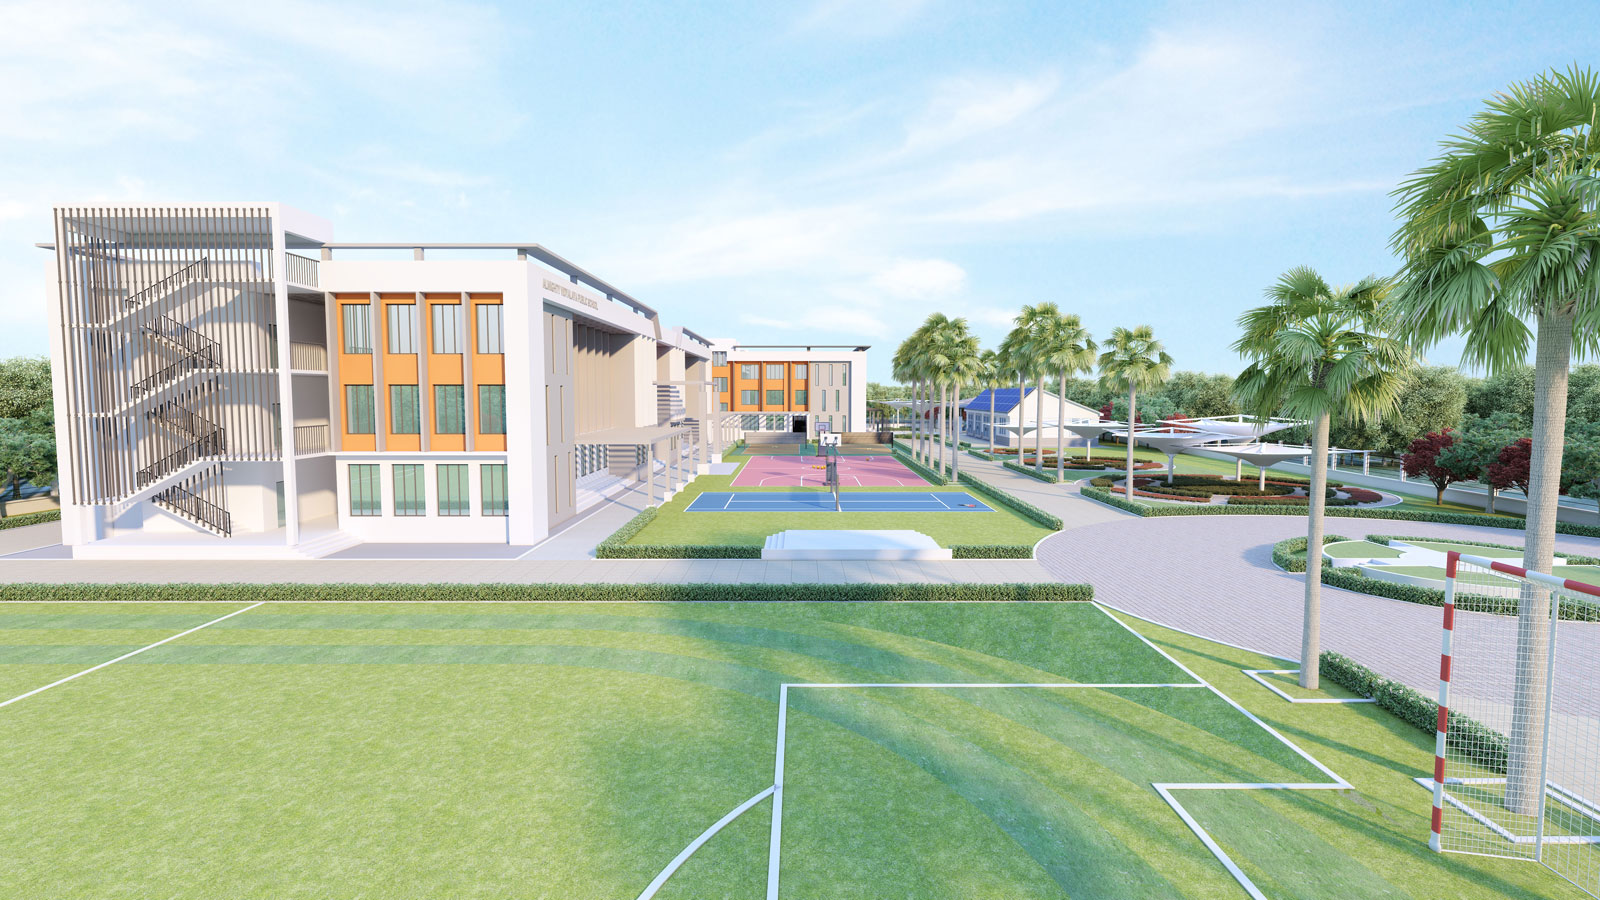 ARCHITECTURE SERVICES FOR SCHOOL BUILDING EXPANSION